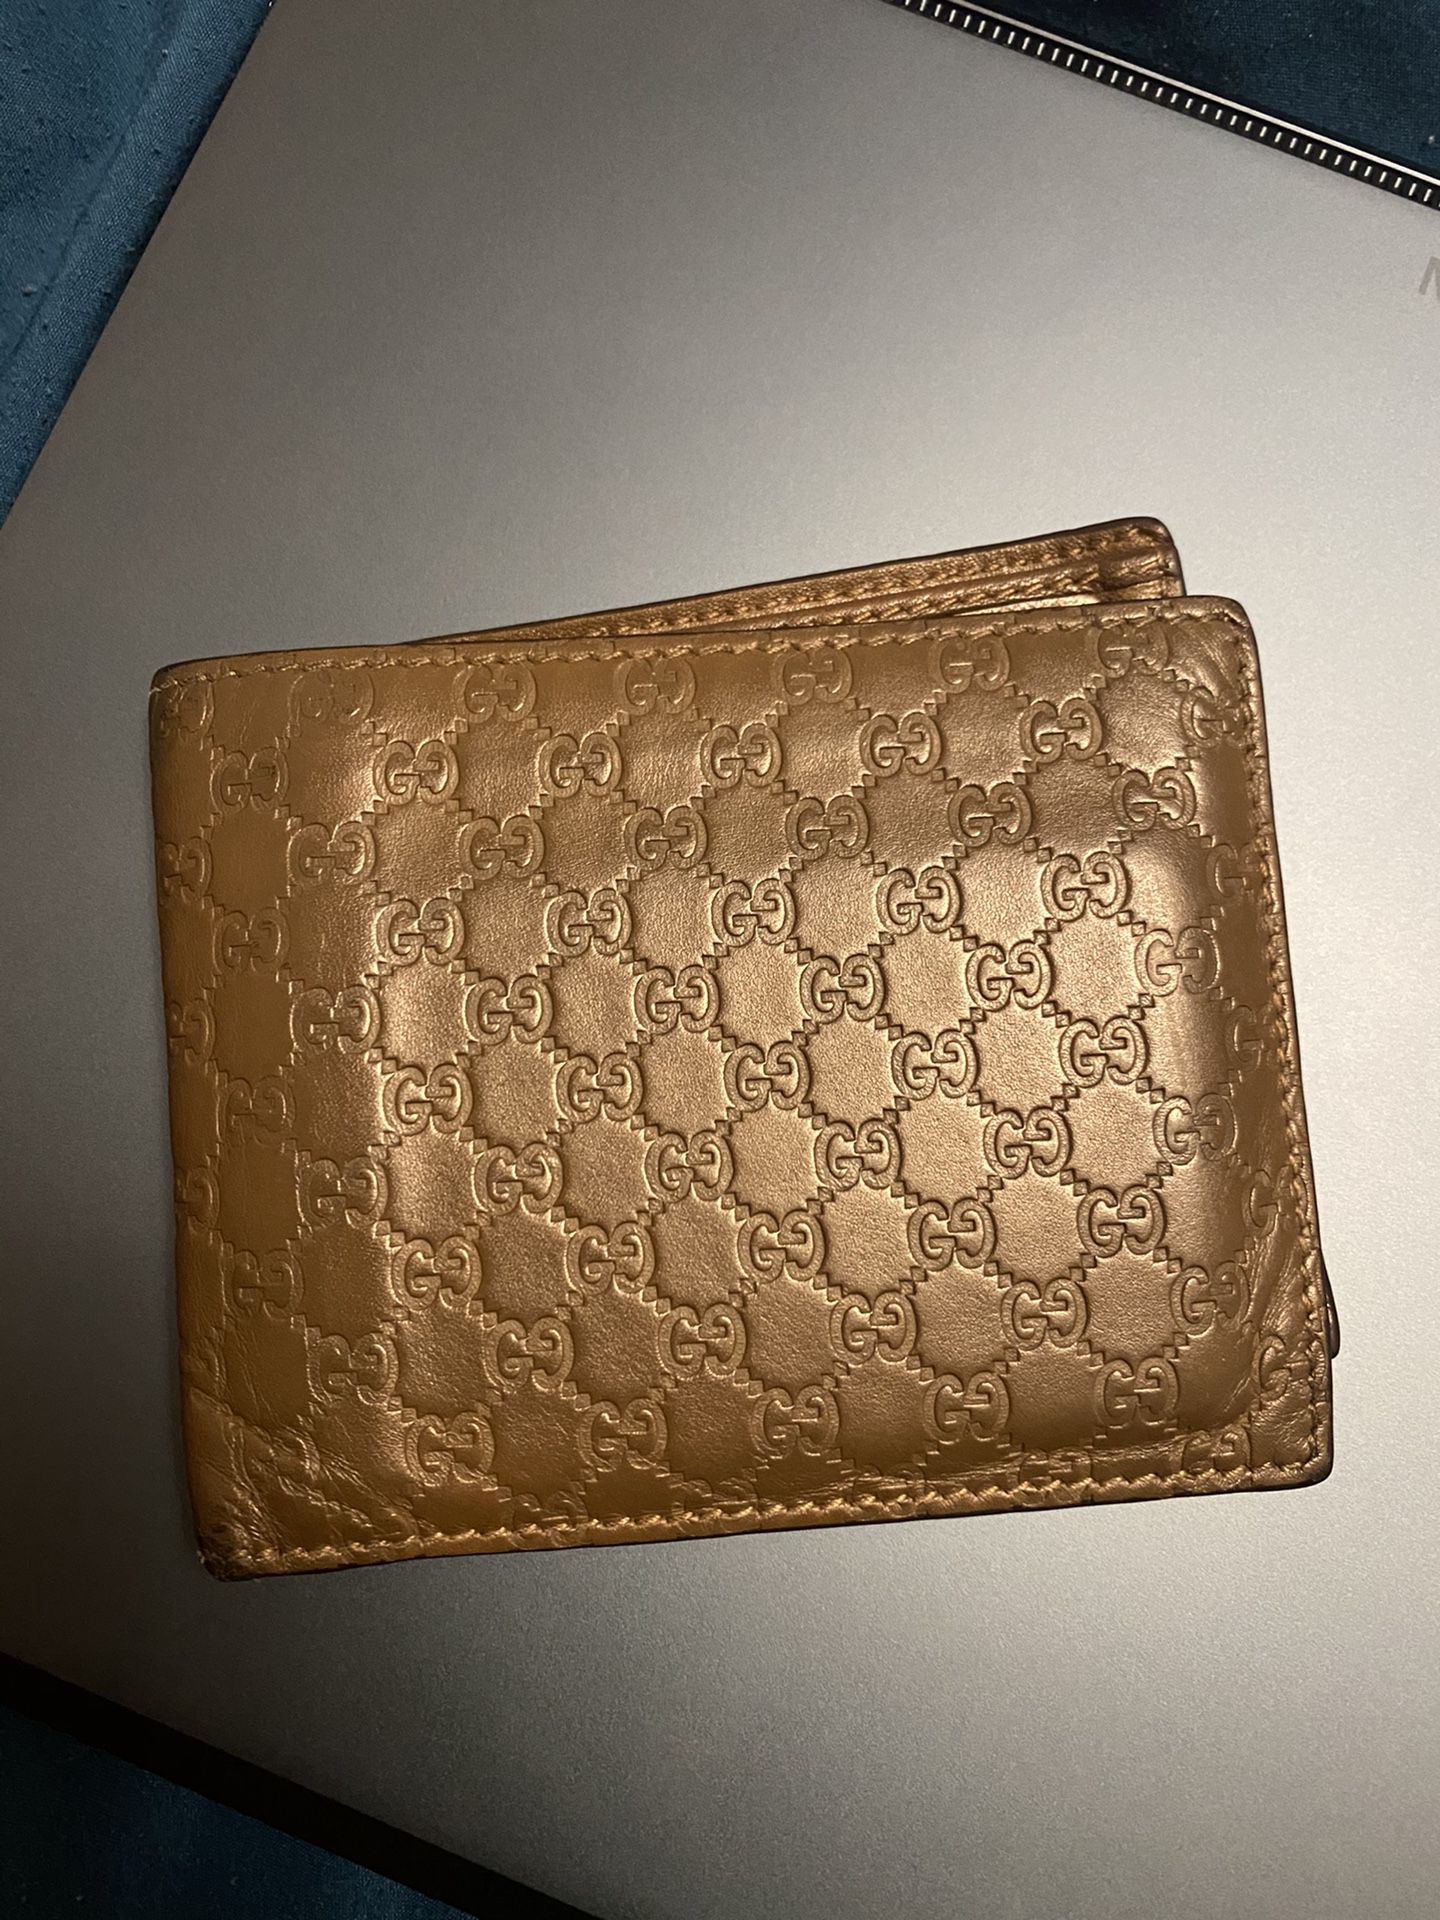 Authentic Gucci wallet with the box